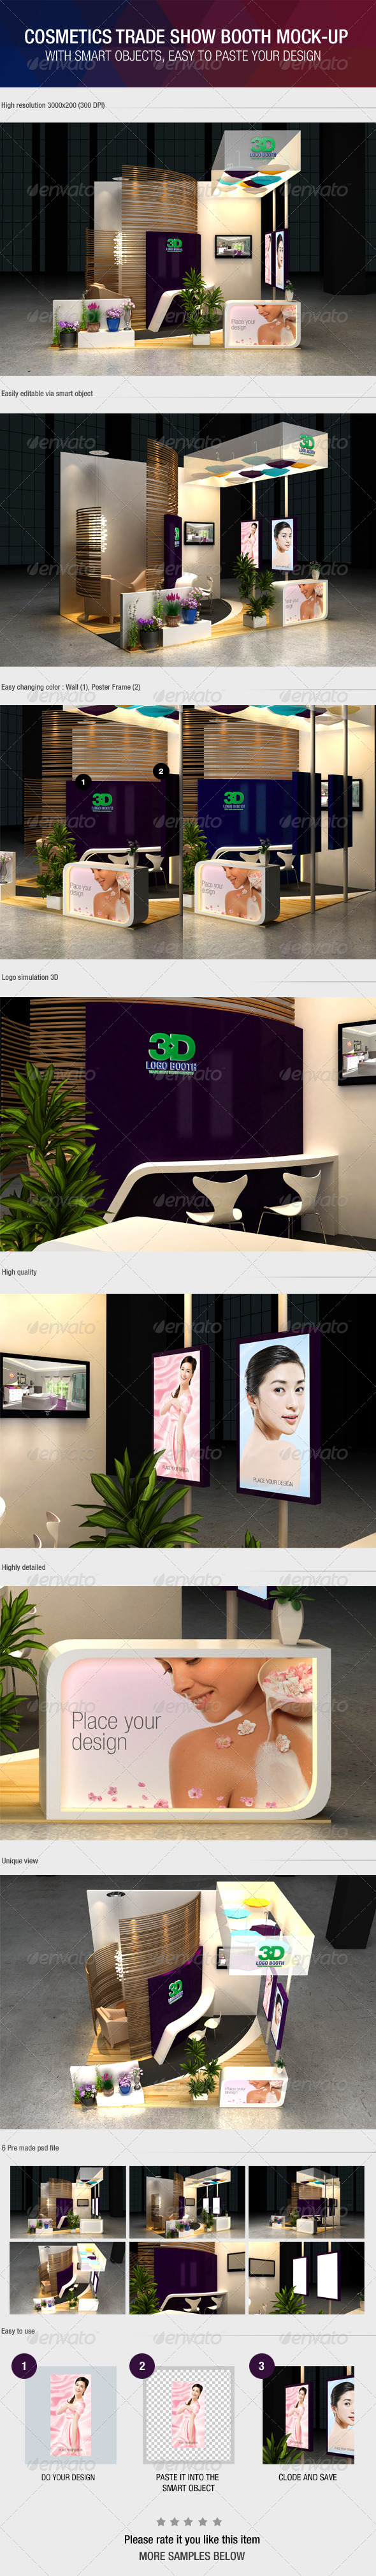 Cosmetics exhibition booth mockup preview.jpg